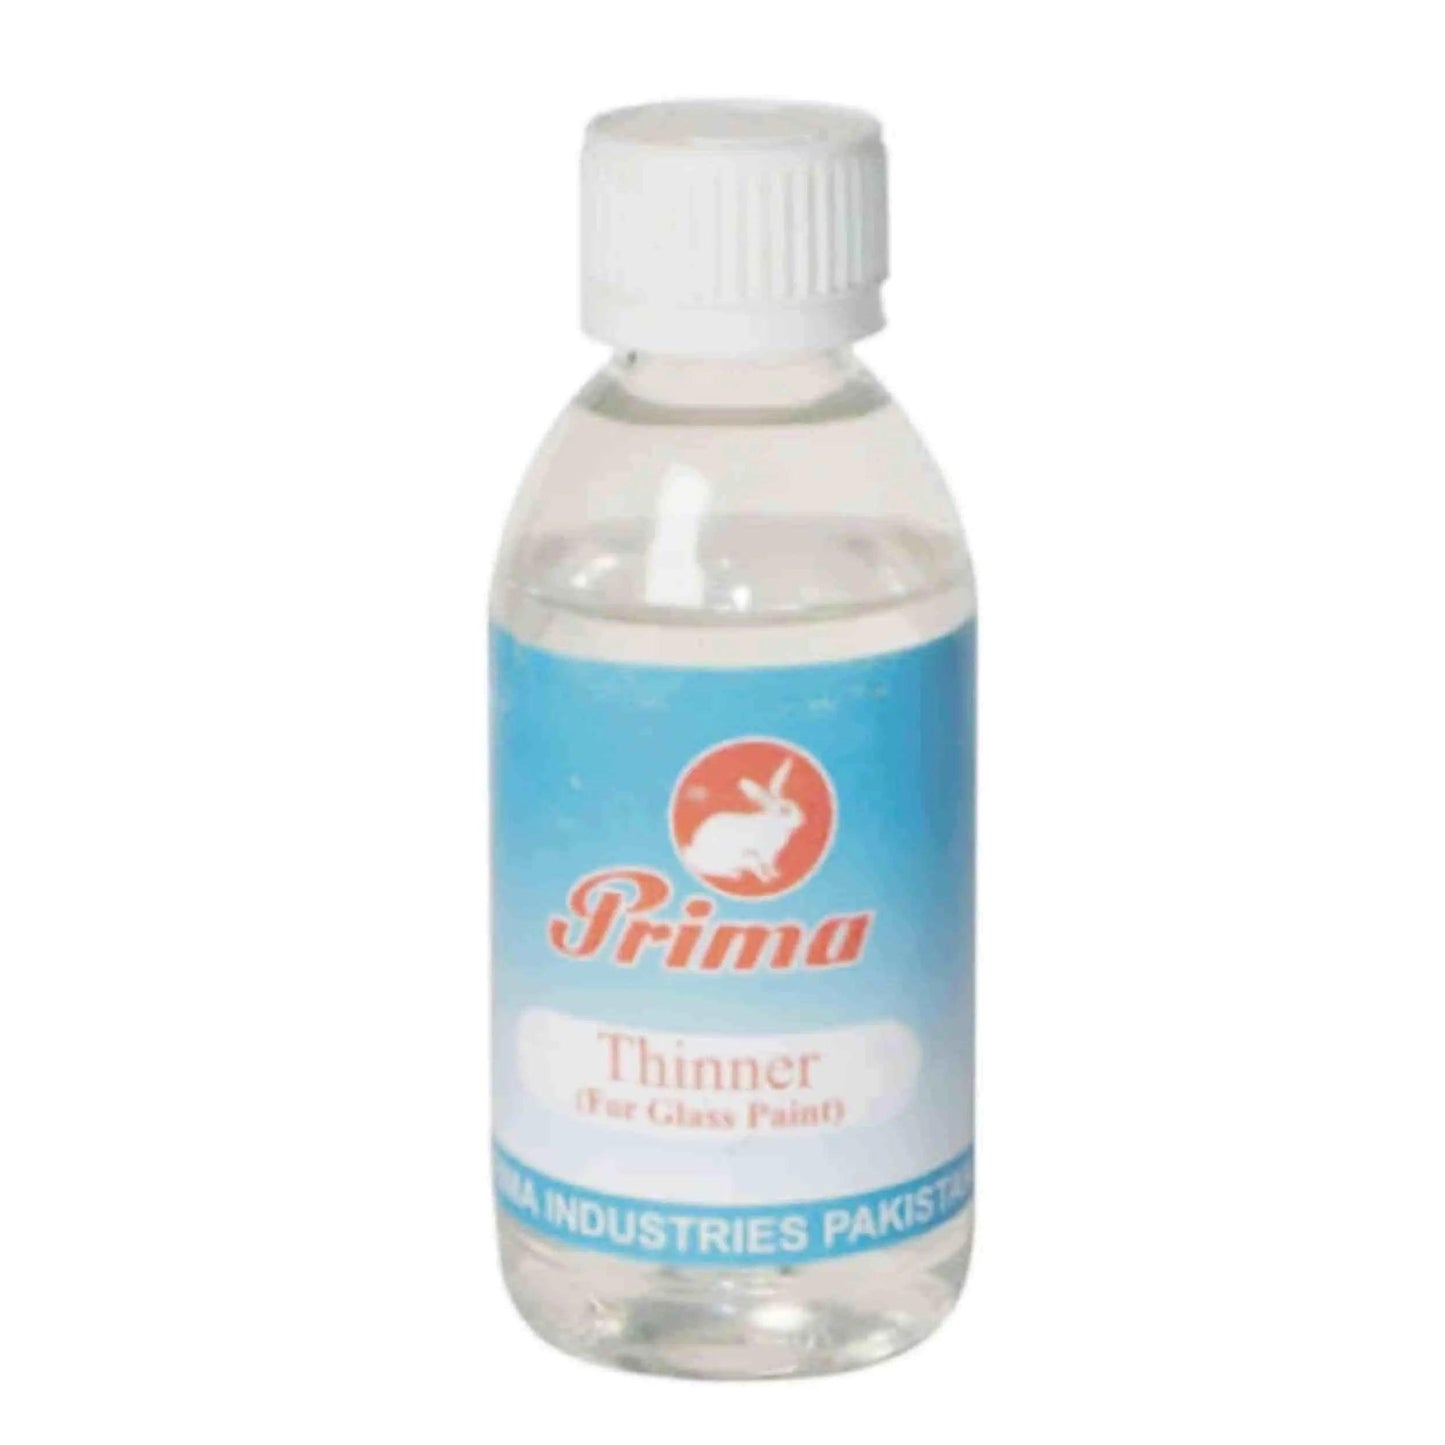 Prima Thinner Bottle 100ml The Stationers